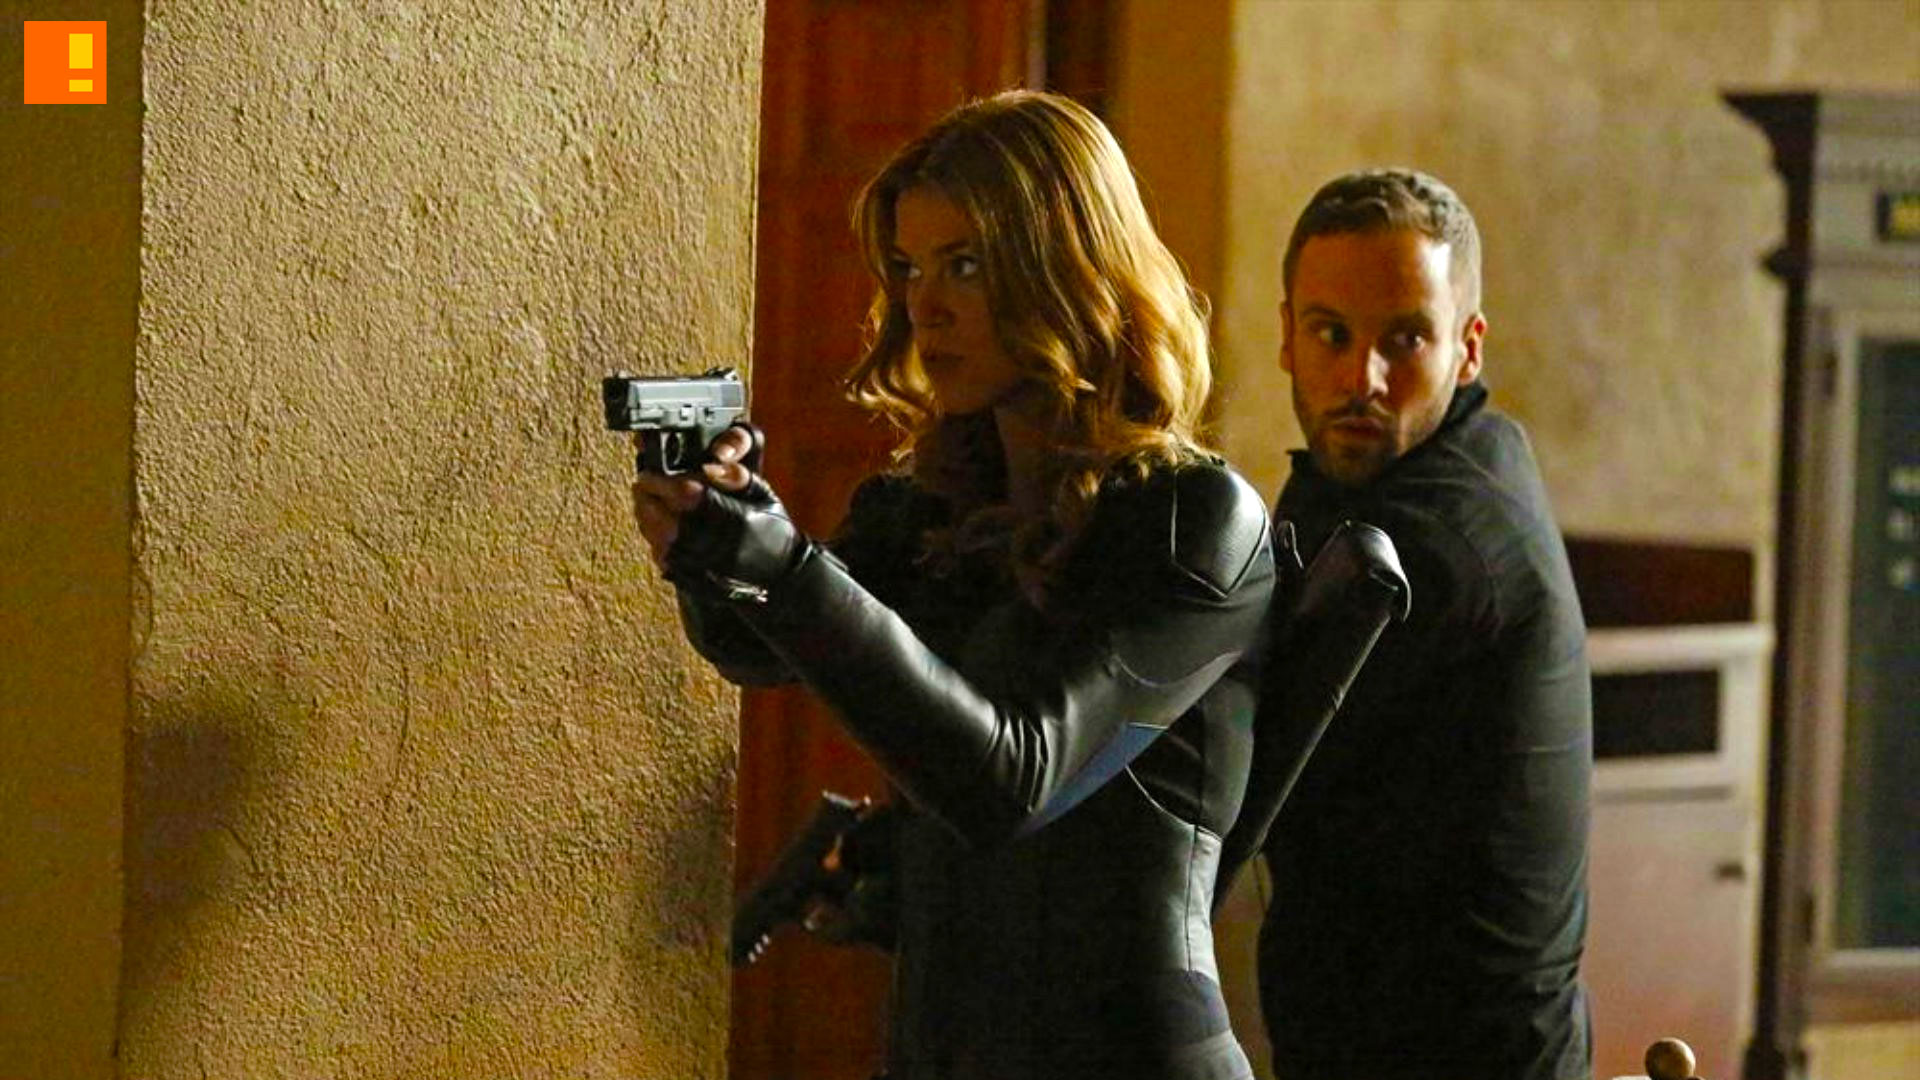 Adrianne Palicki‘s Bobbi Morse (also known as Mockingbird) and Nick Blood’s Lance Hunter. Agents of SHIELD. the action pixel. @theactionpixel. marvel. abc.